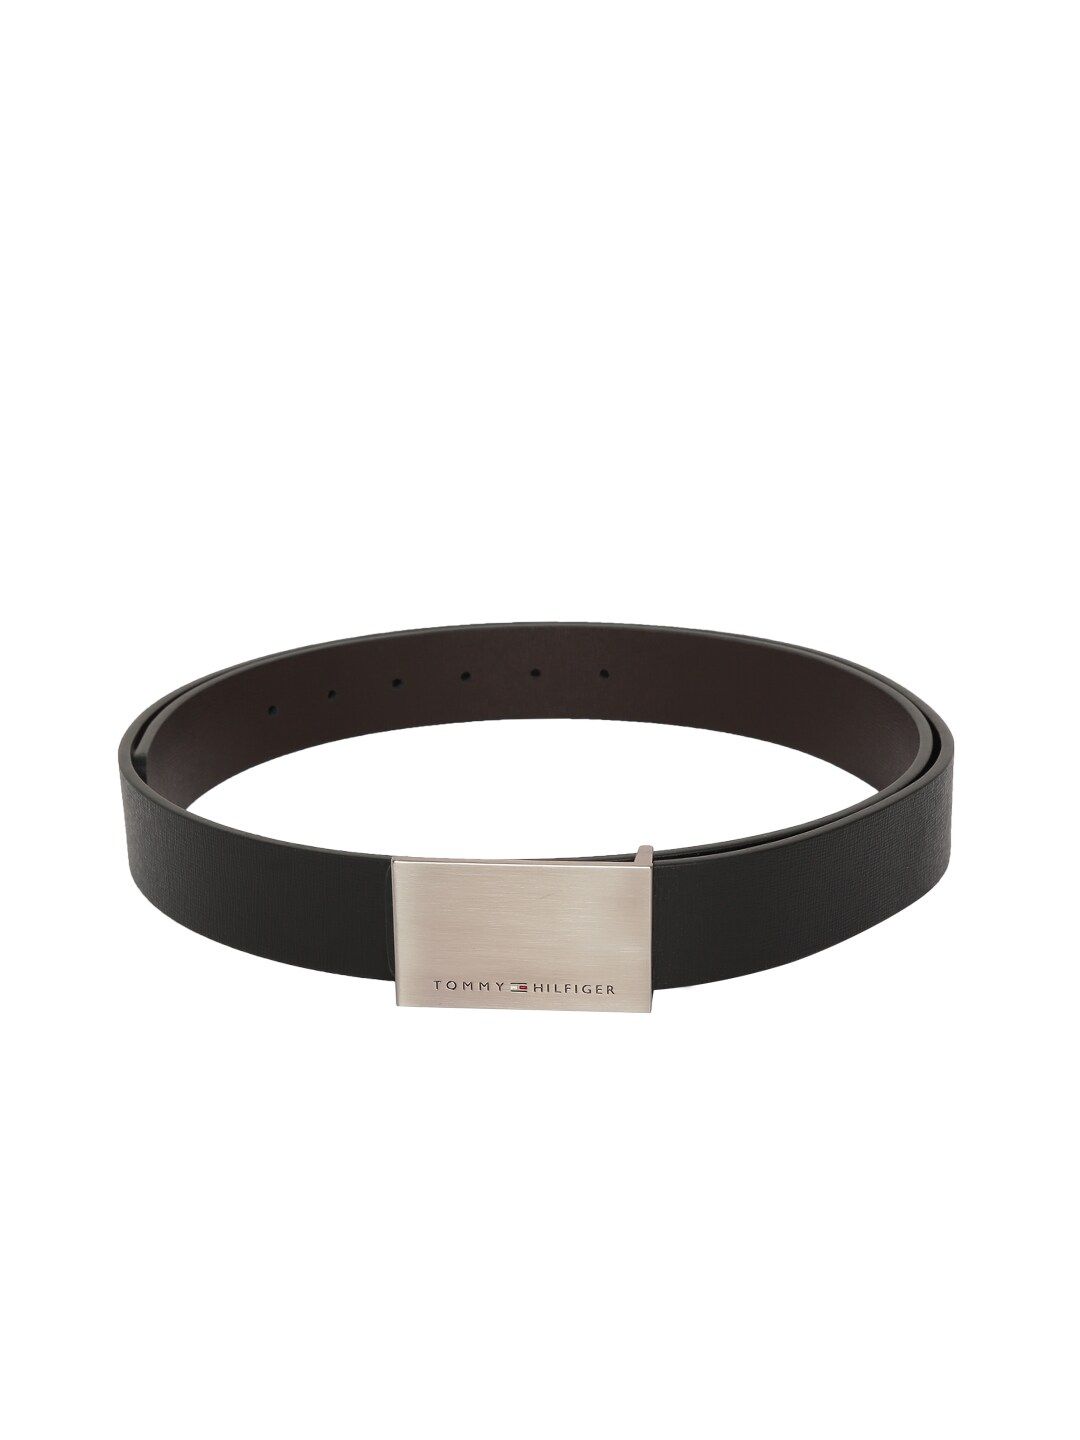 Tommy Hilfiger Unisex Black & Brown Textured Reversible Leather Belt Price in India